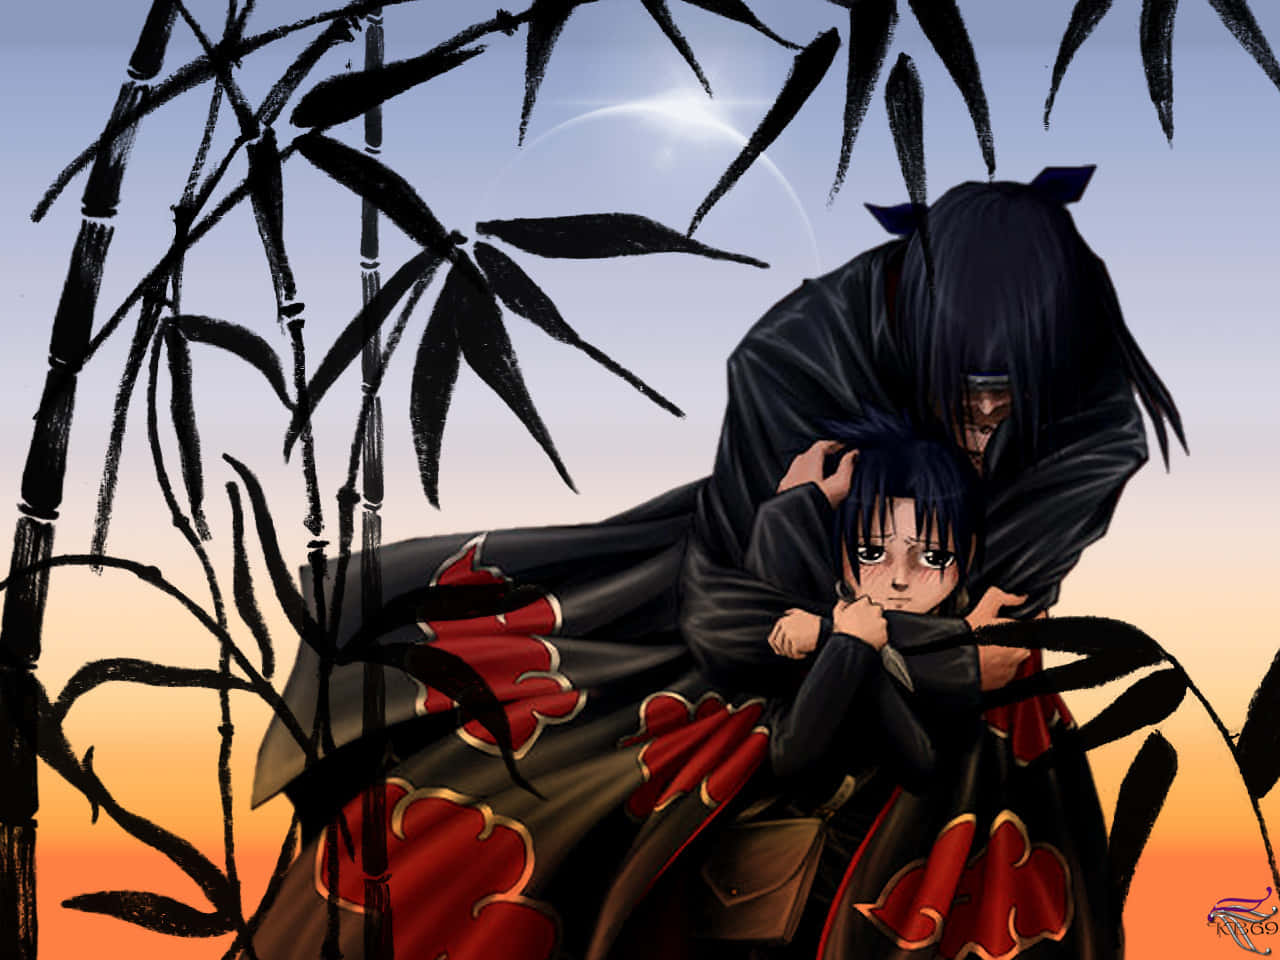 Cool Itachi: A Wallpaper For The Coolest Shinobi Fan Background